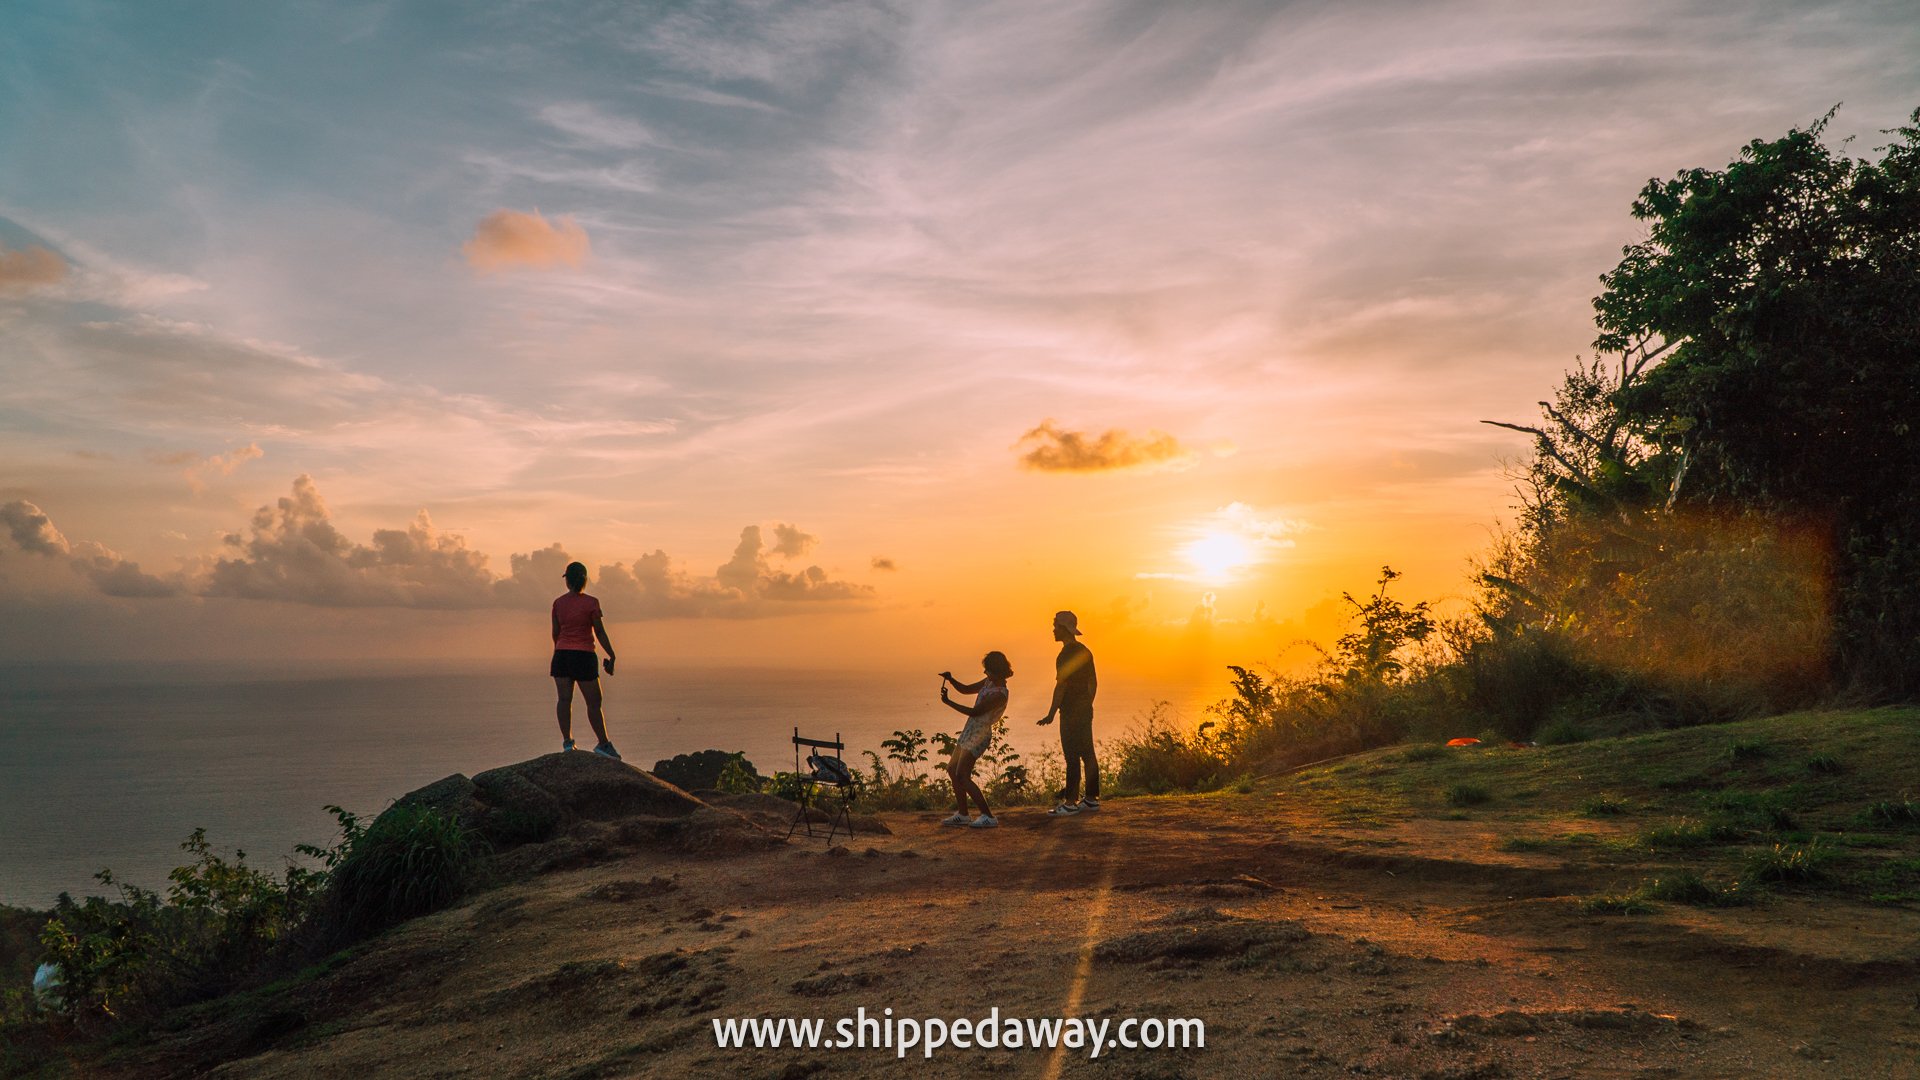 Sunset at the best viewpoint in Phuket, Thailand - black rock viewpoint